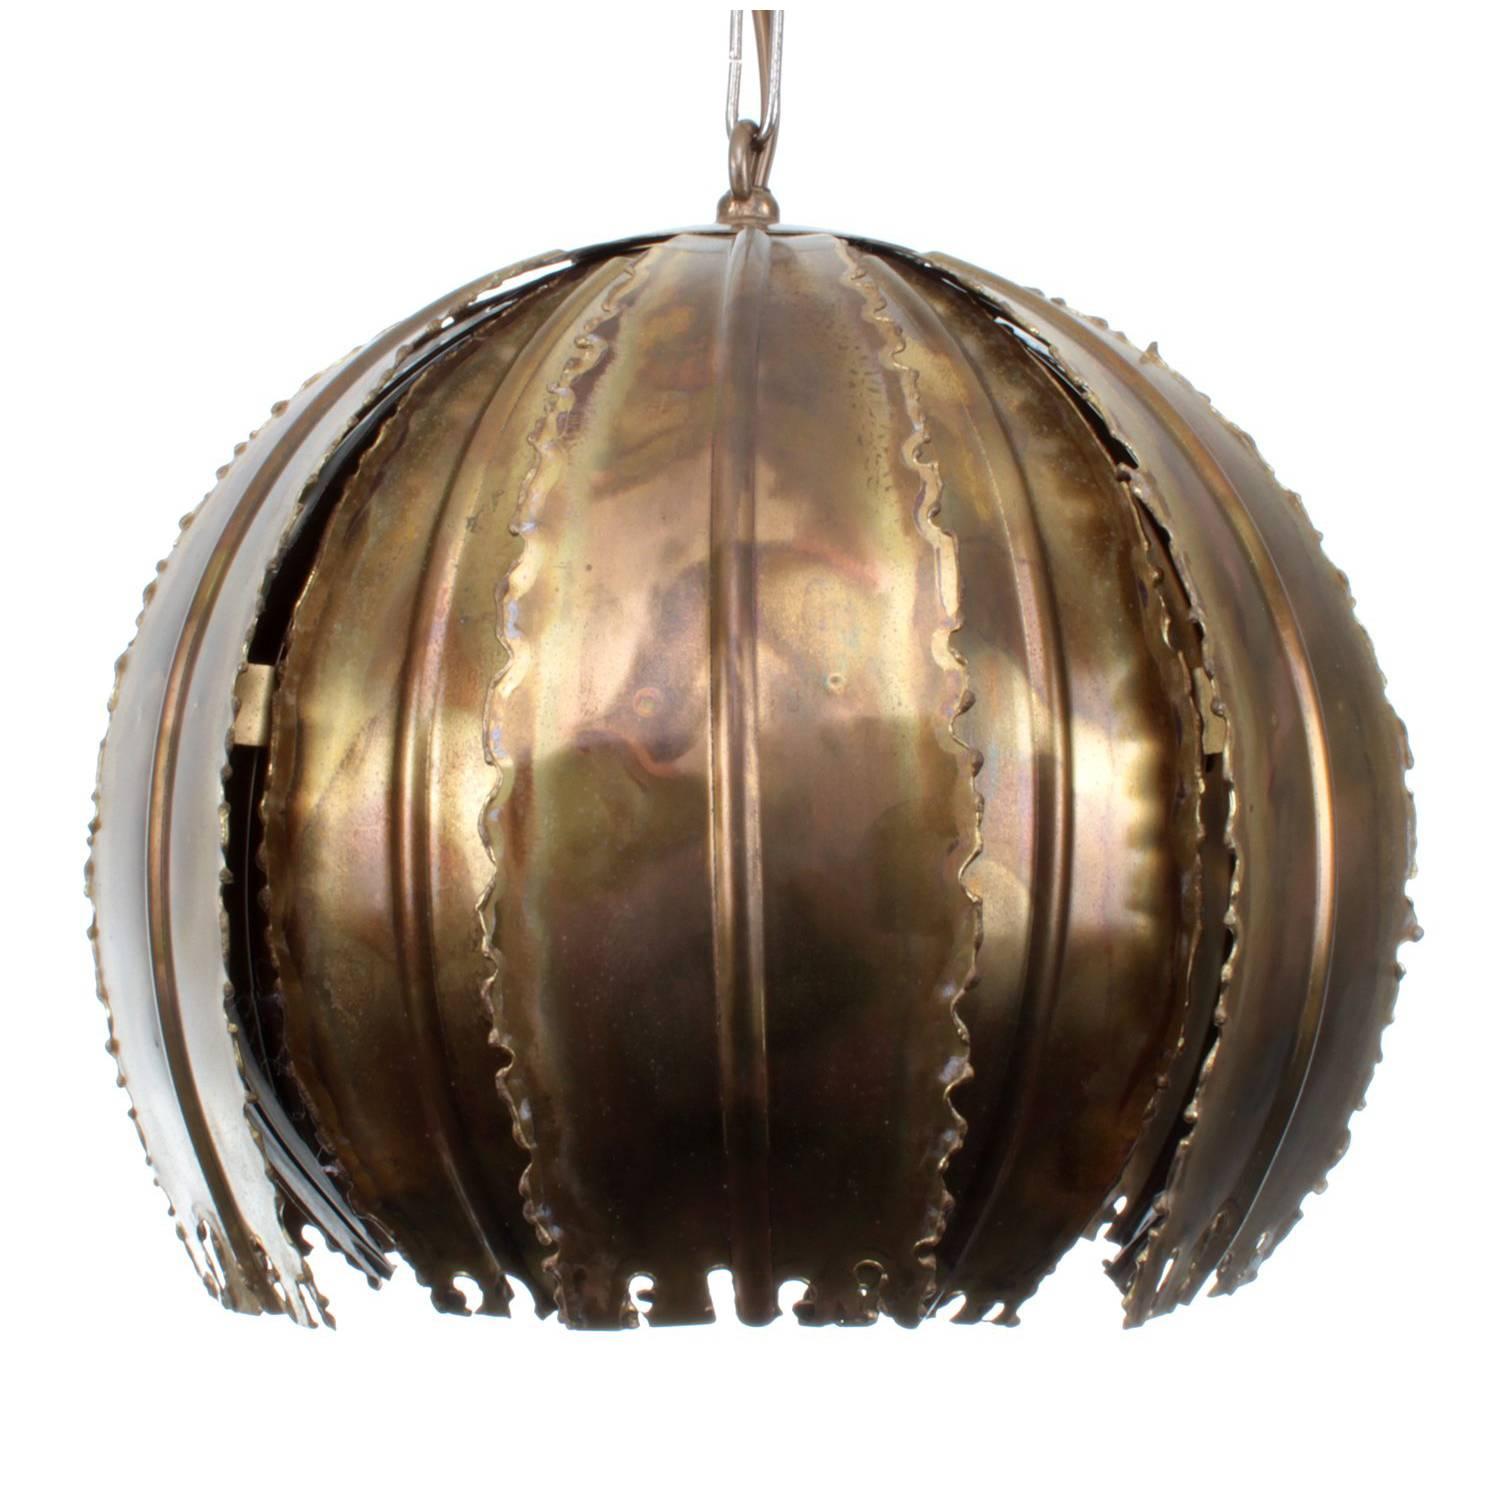 Type 6404, Brass Pendant by Holm Sorensen, 1960s Danish Eclectic Light For Sale